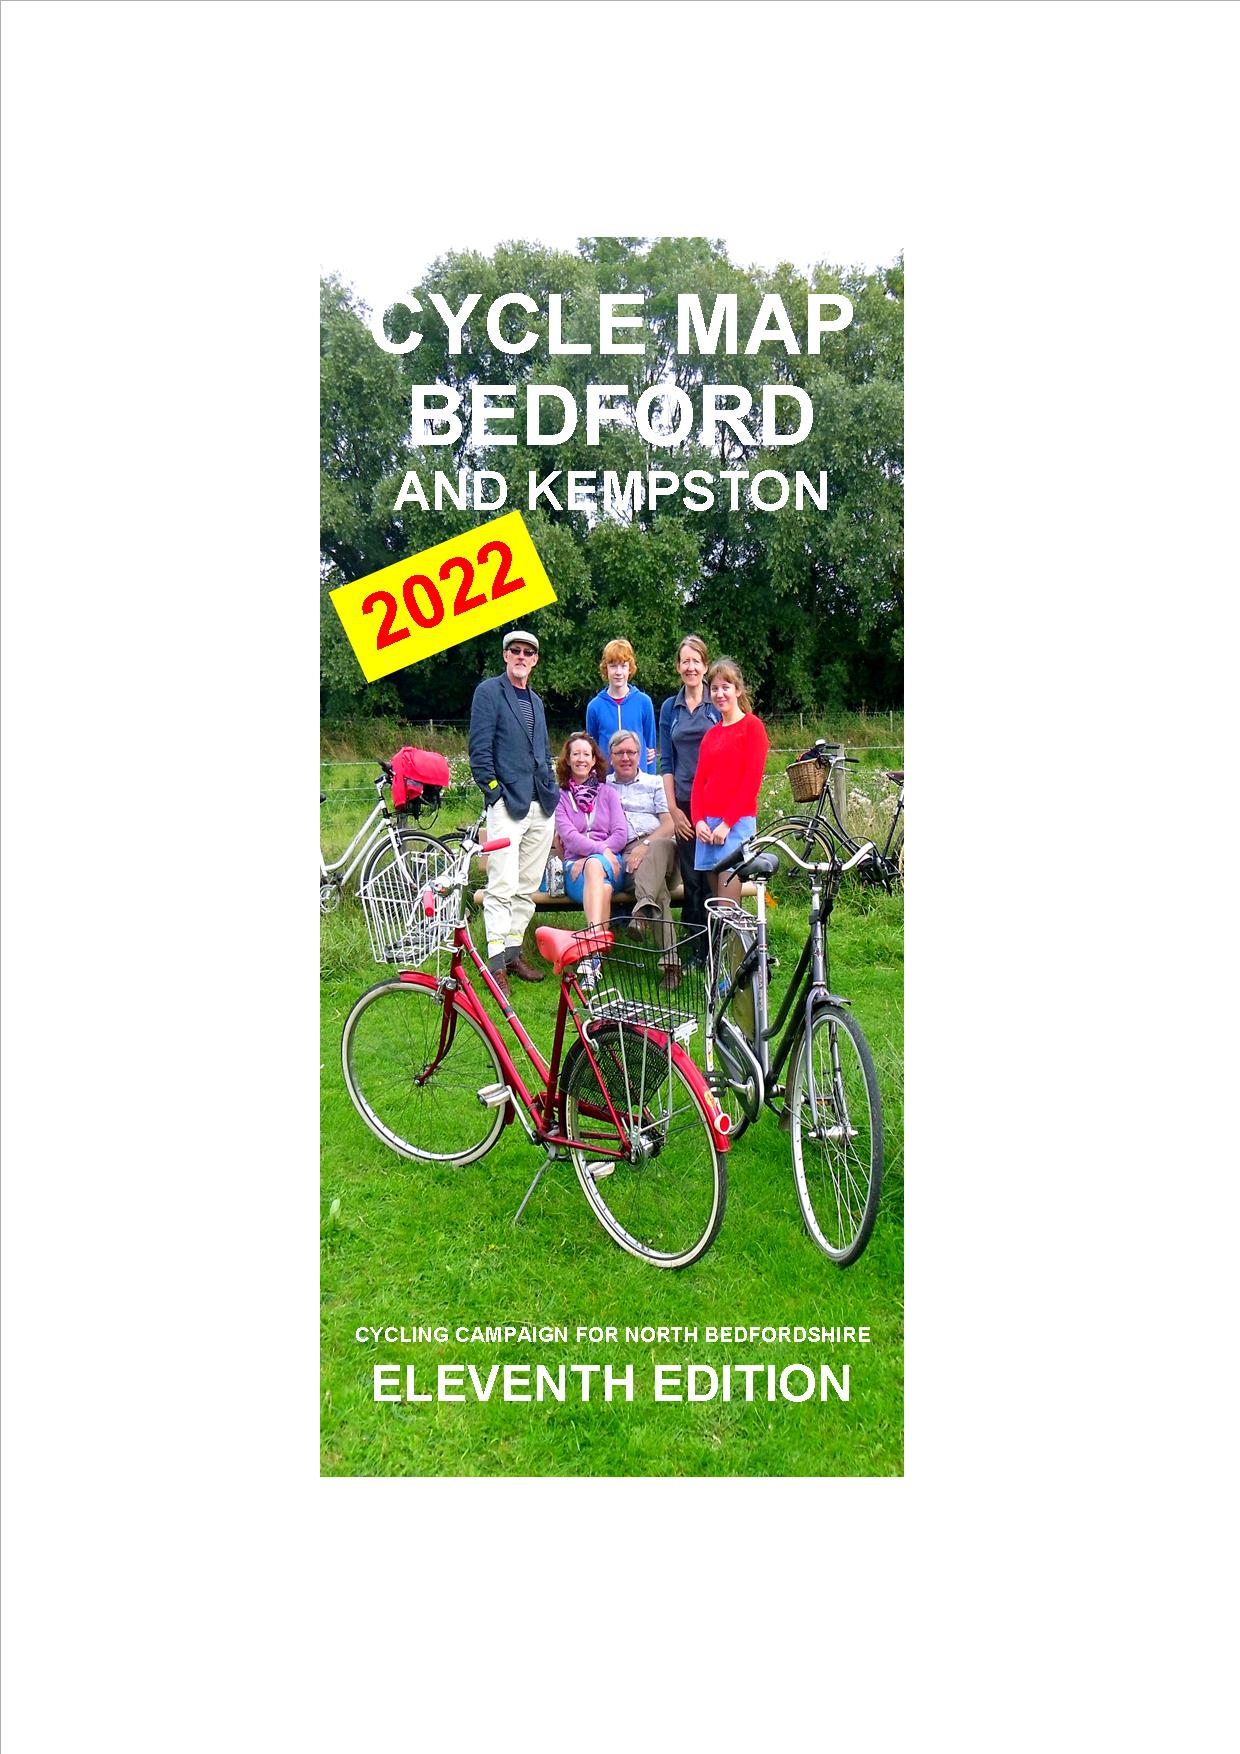 Bedford and Kempston Cycle Map